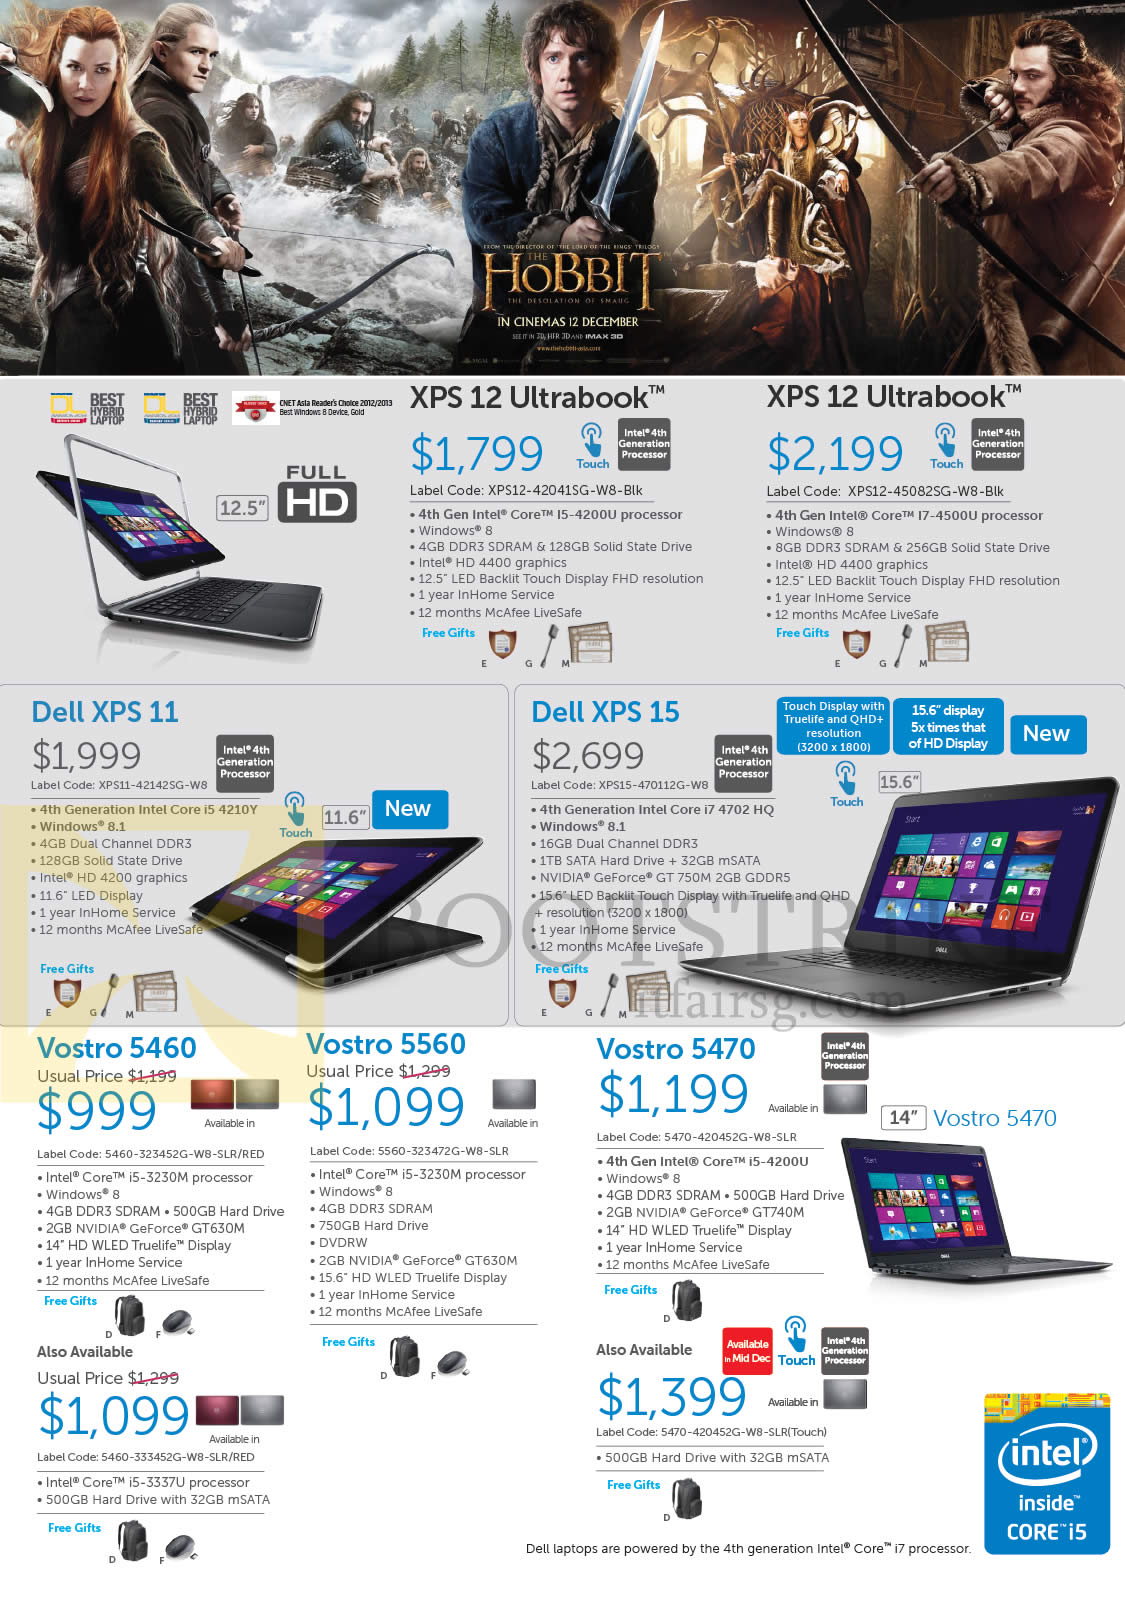 SITEX 2013 price list image brochure of Dell Notebooks XPS 12 Ultrabook, XPS 11, XPS 15, Vostro 5460, 5560, 5470